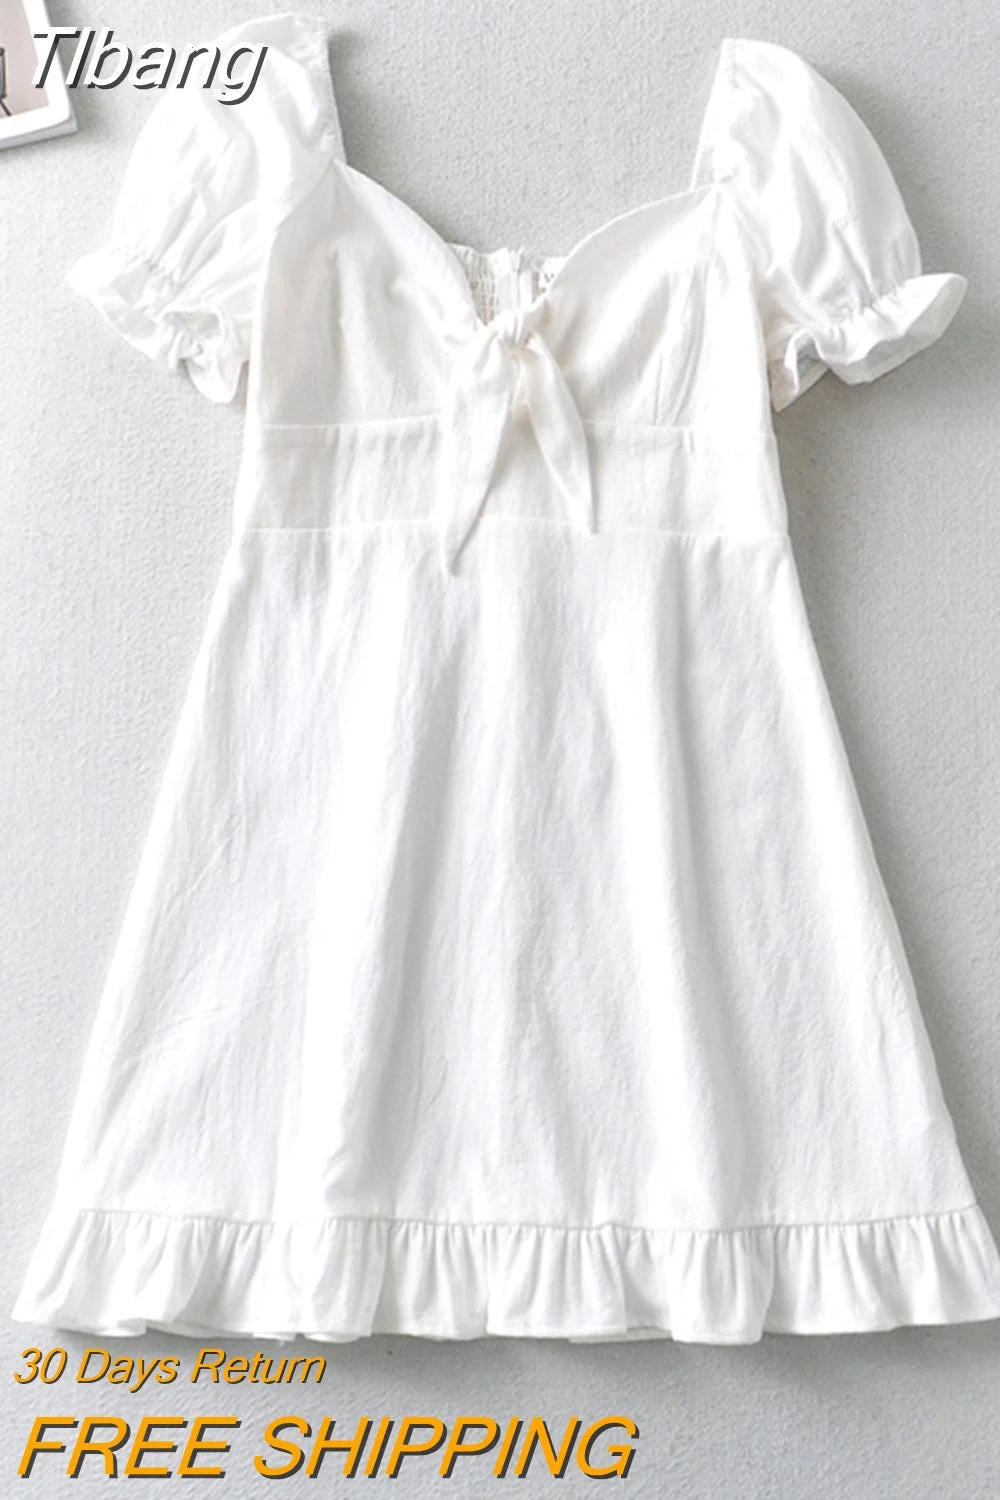 Tlbang Summer Clothes For Women 2023 Sweetheart Neck Tie Casual White Dress Back Shirred Short Sleeve Ruffle Hem Mini Dress